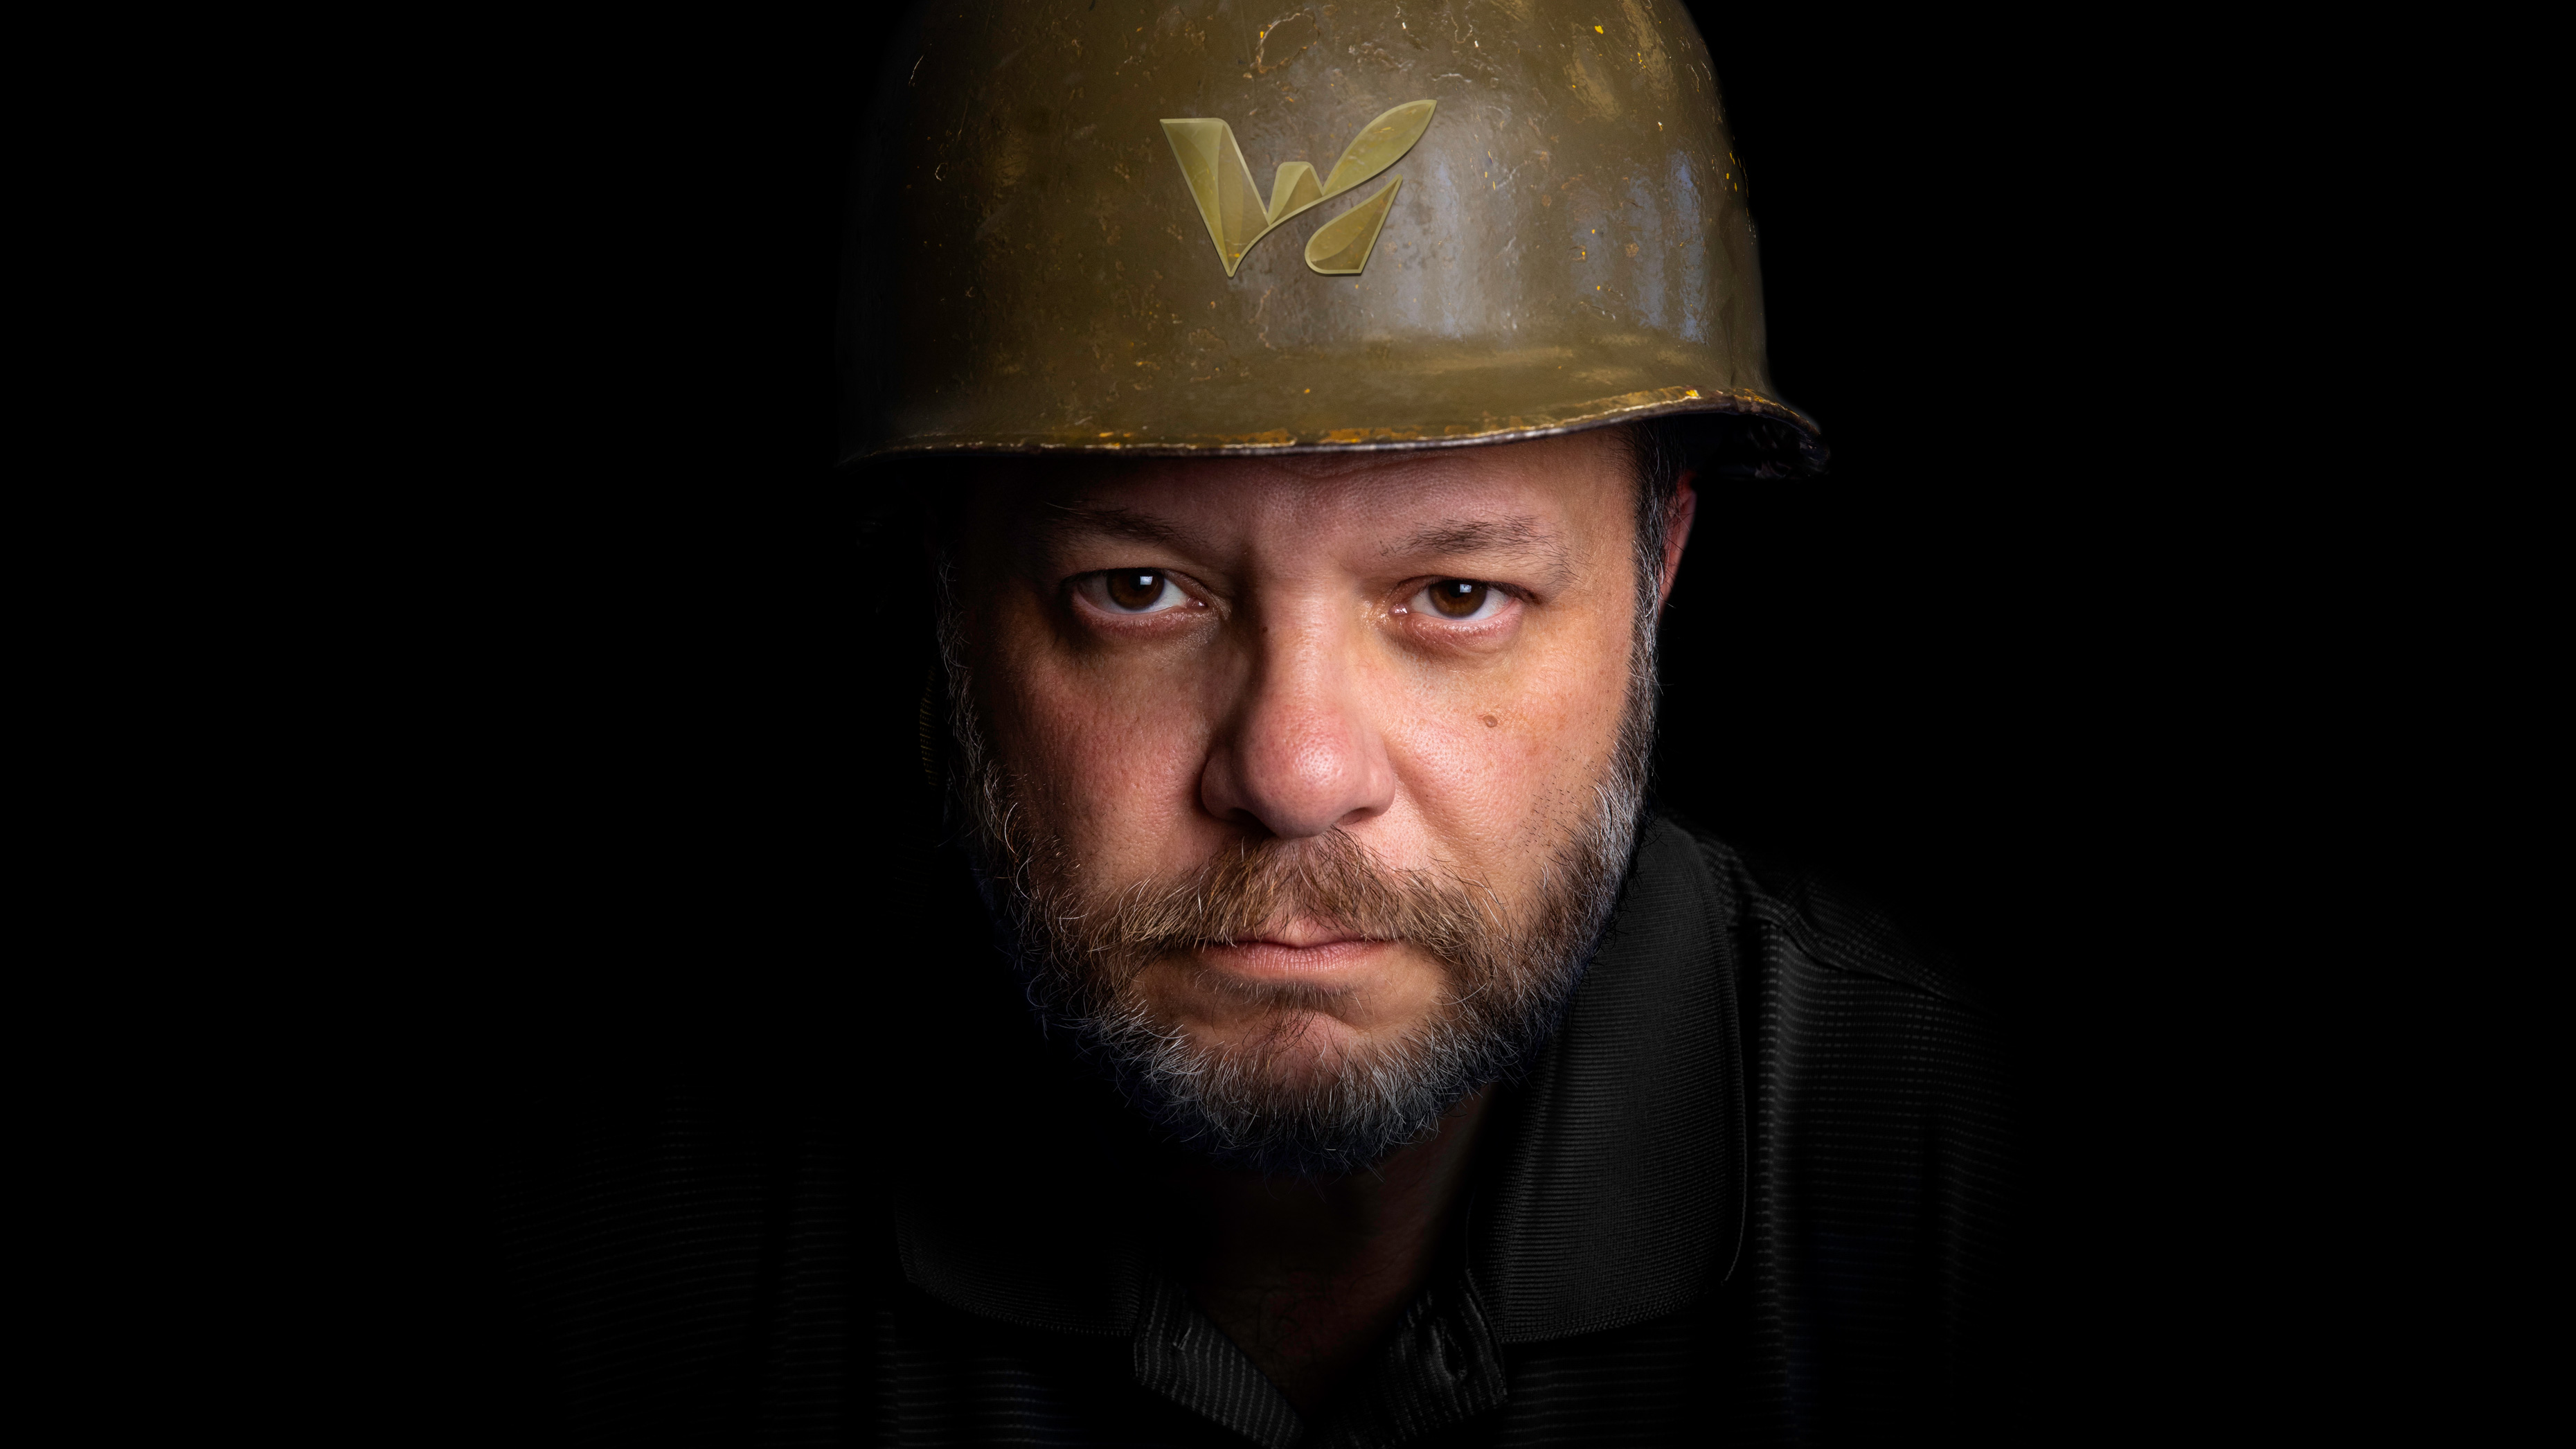 A close up headshot of Frank Monteiro wearing an army helmet with The Waterbury logo